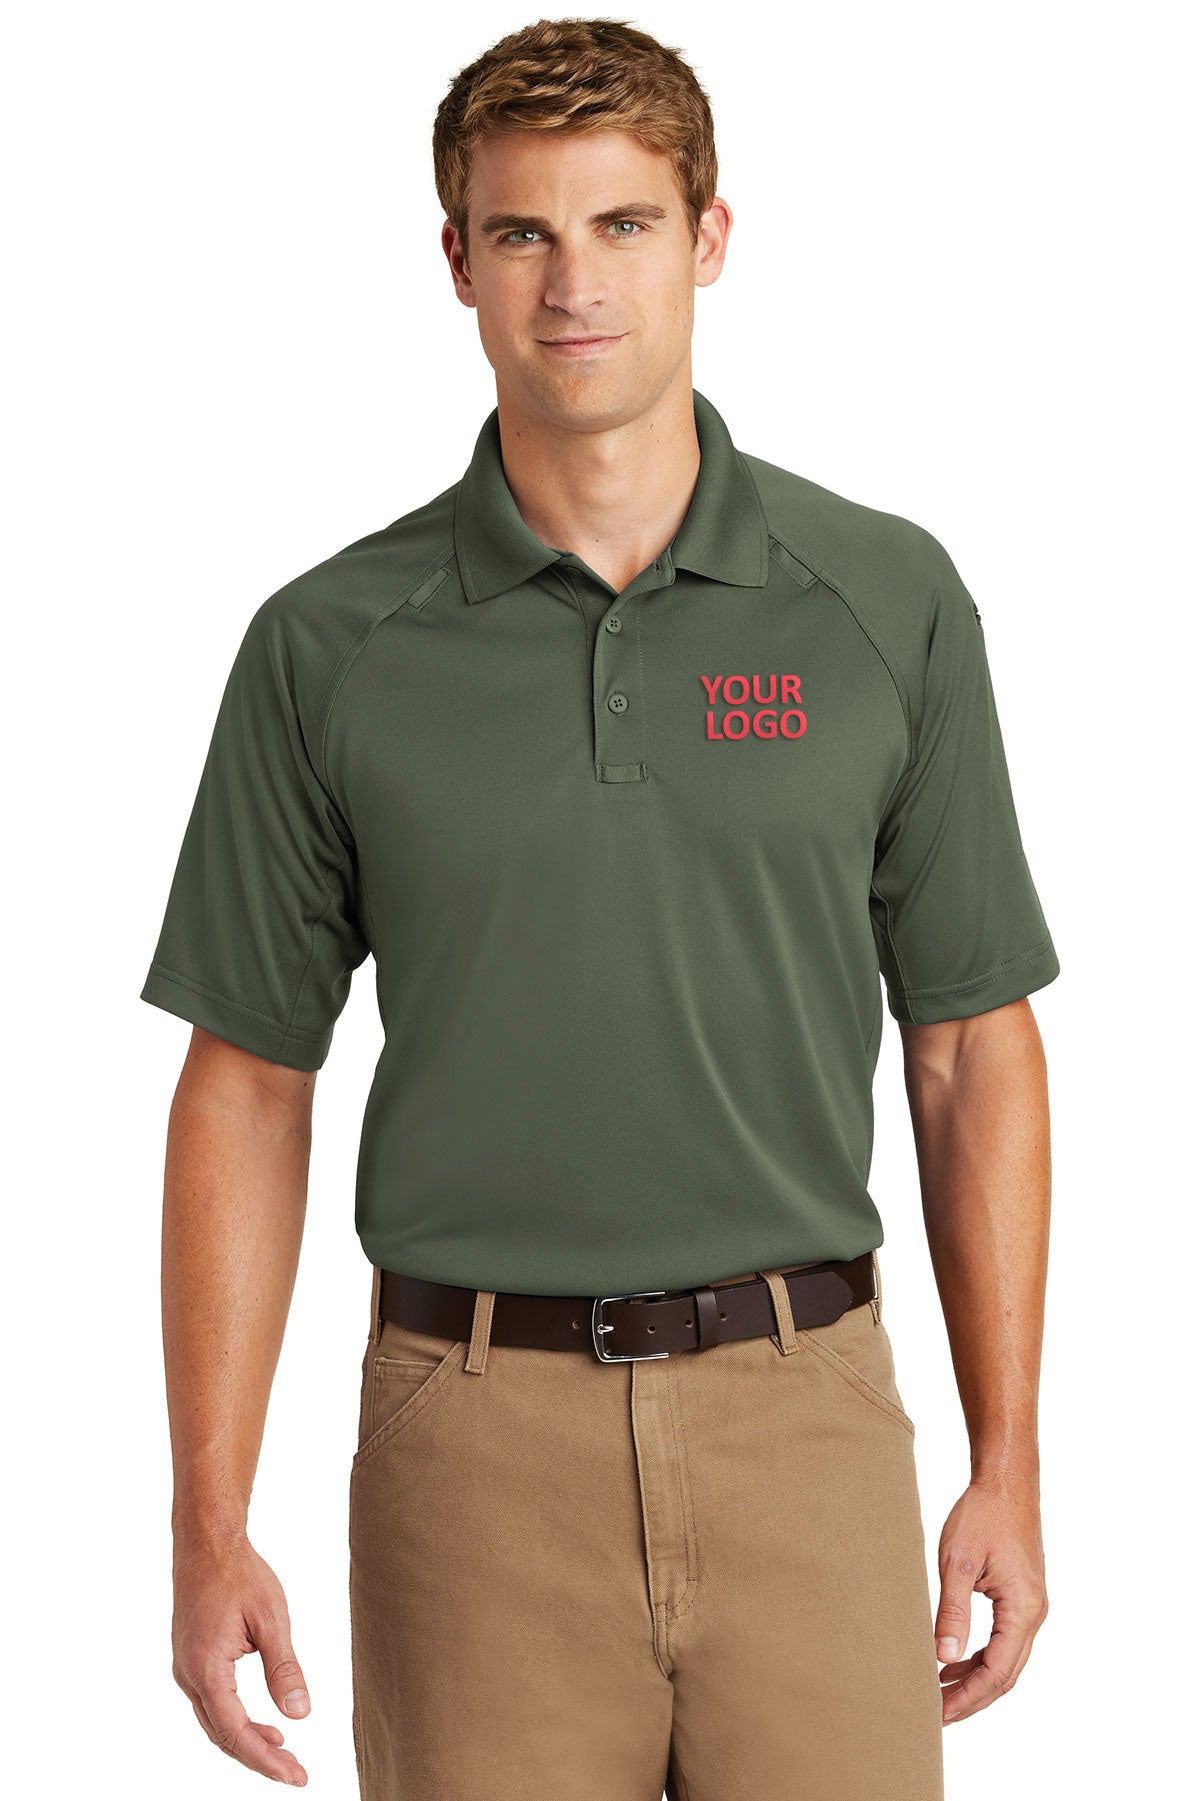 CornerStone Tactical Green CS410 embroidered polo shirts for business